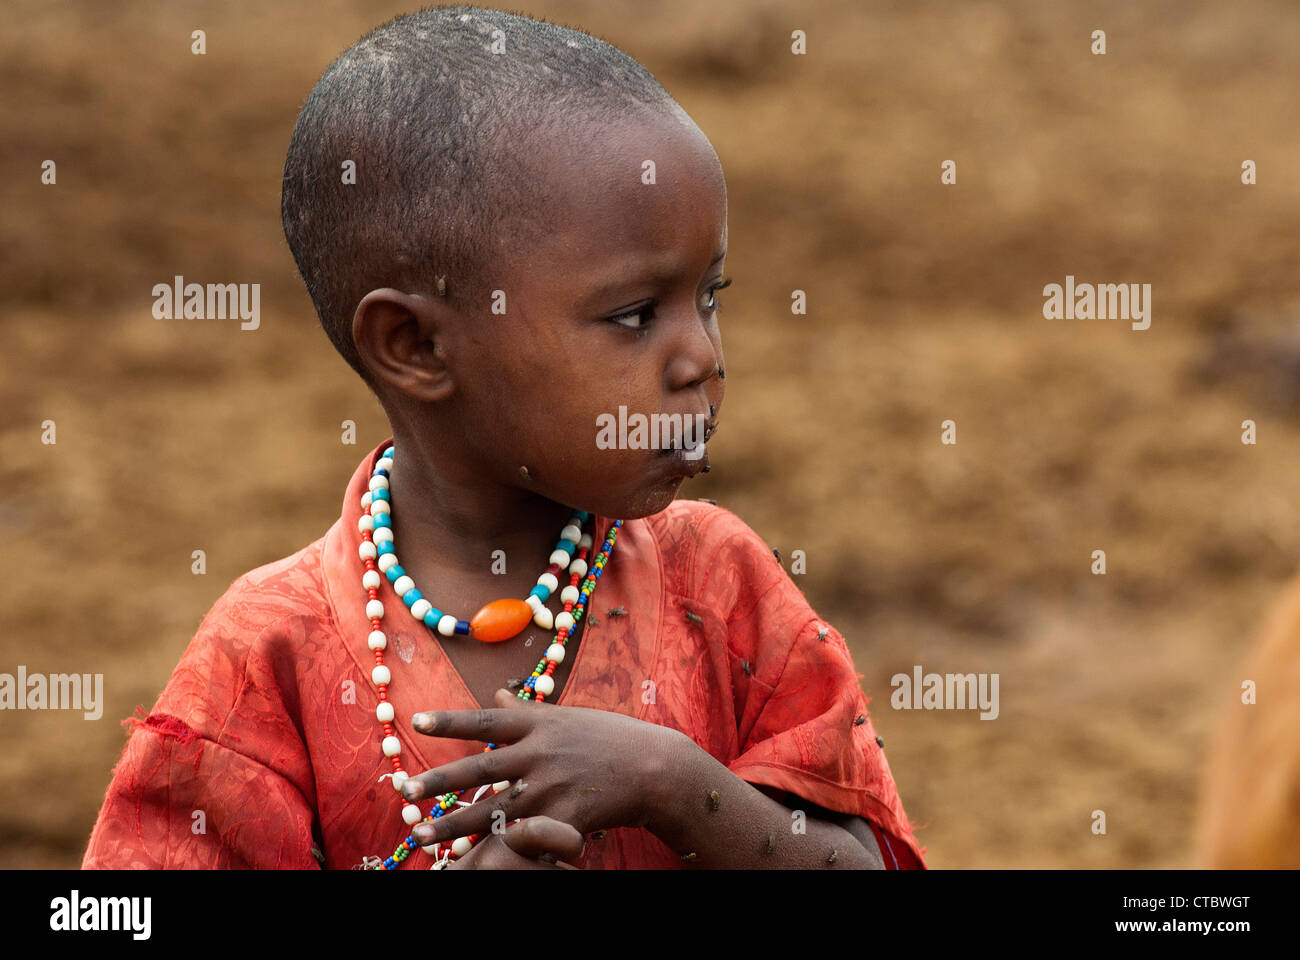 Maasai child untroubled by flies Stock Photo